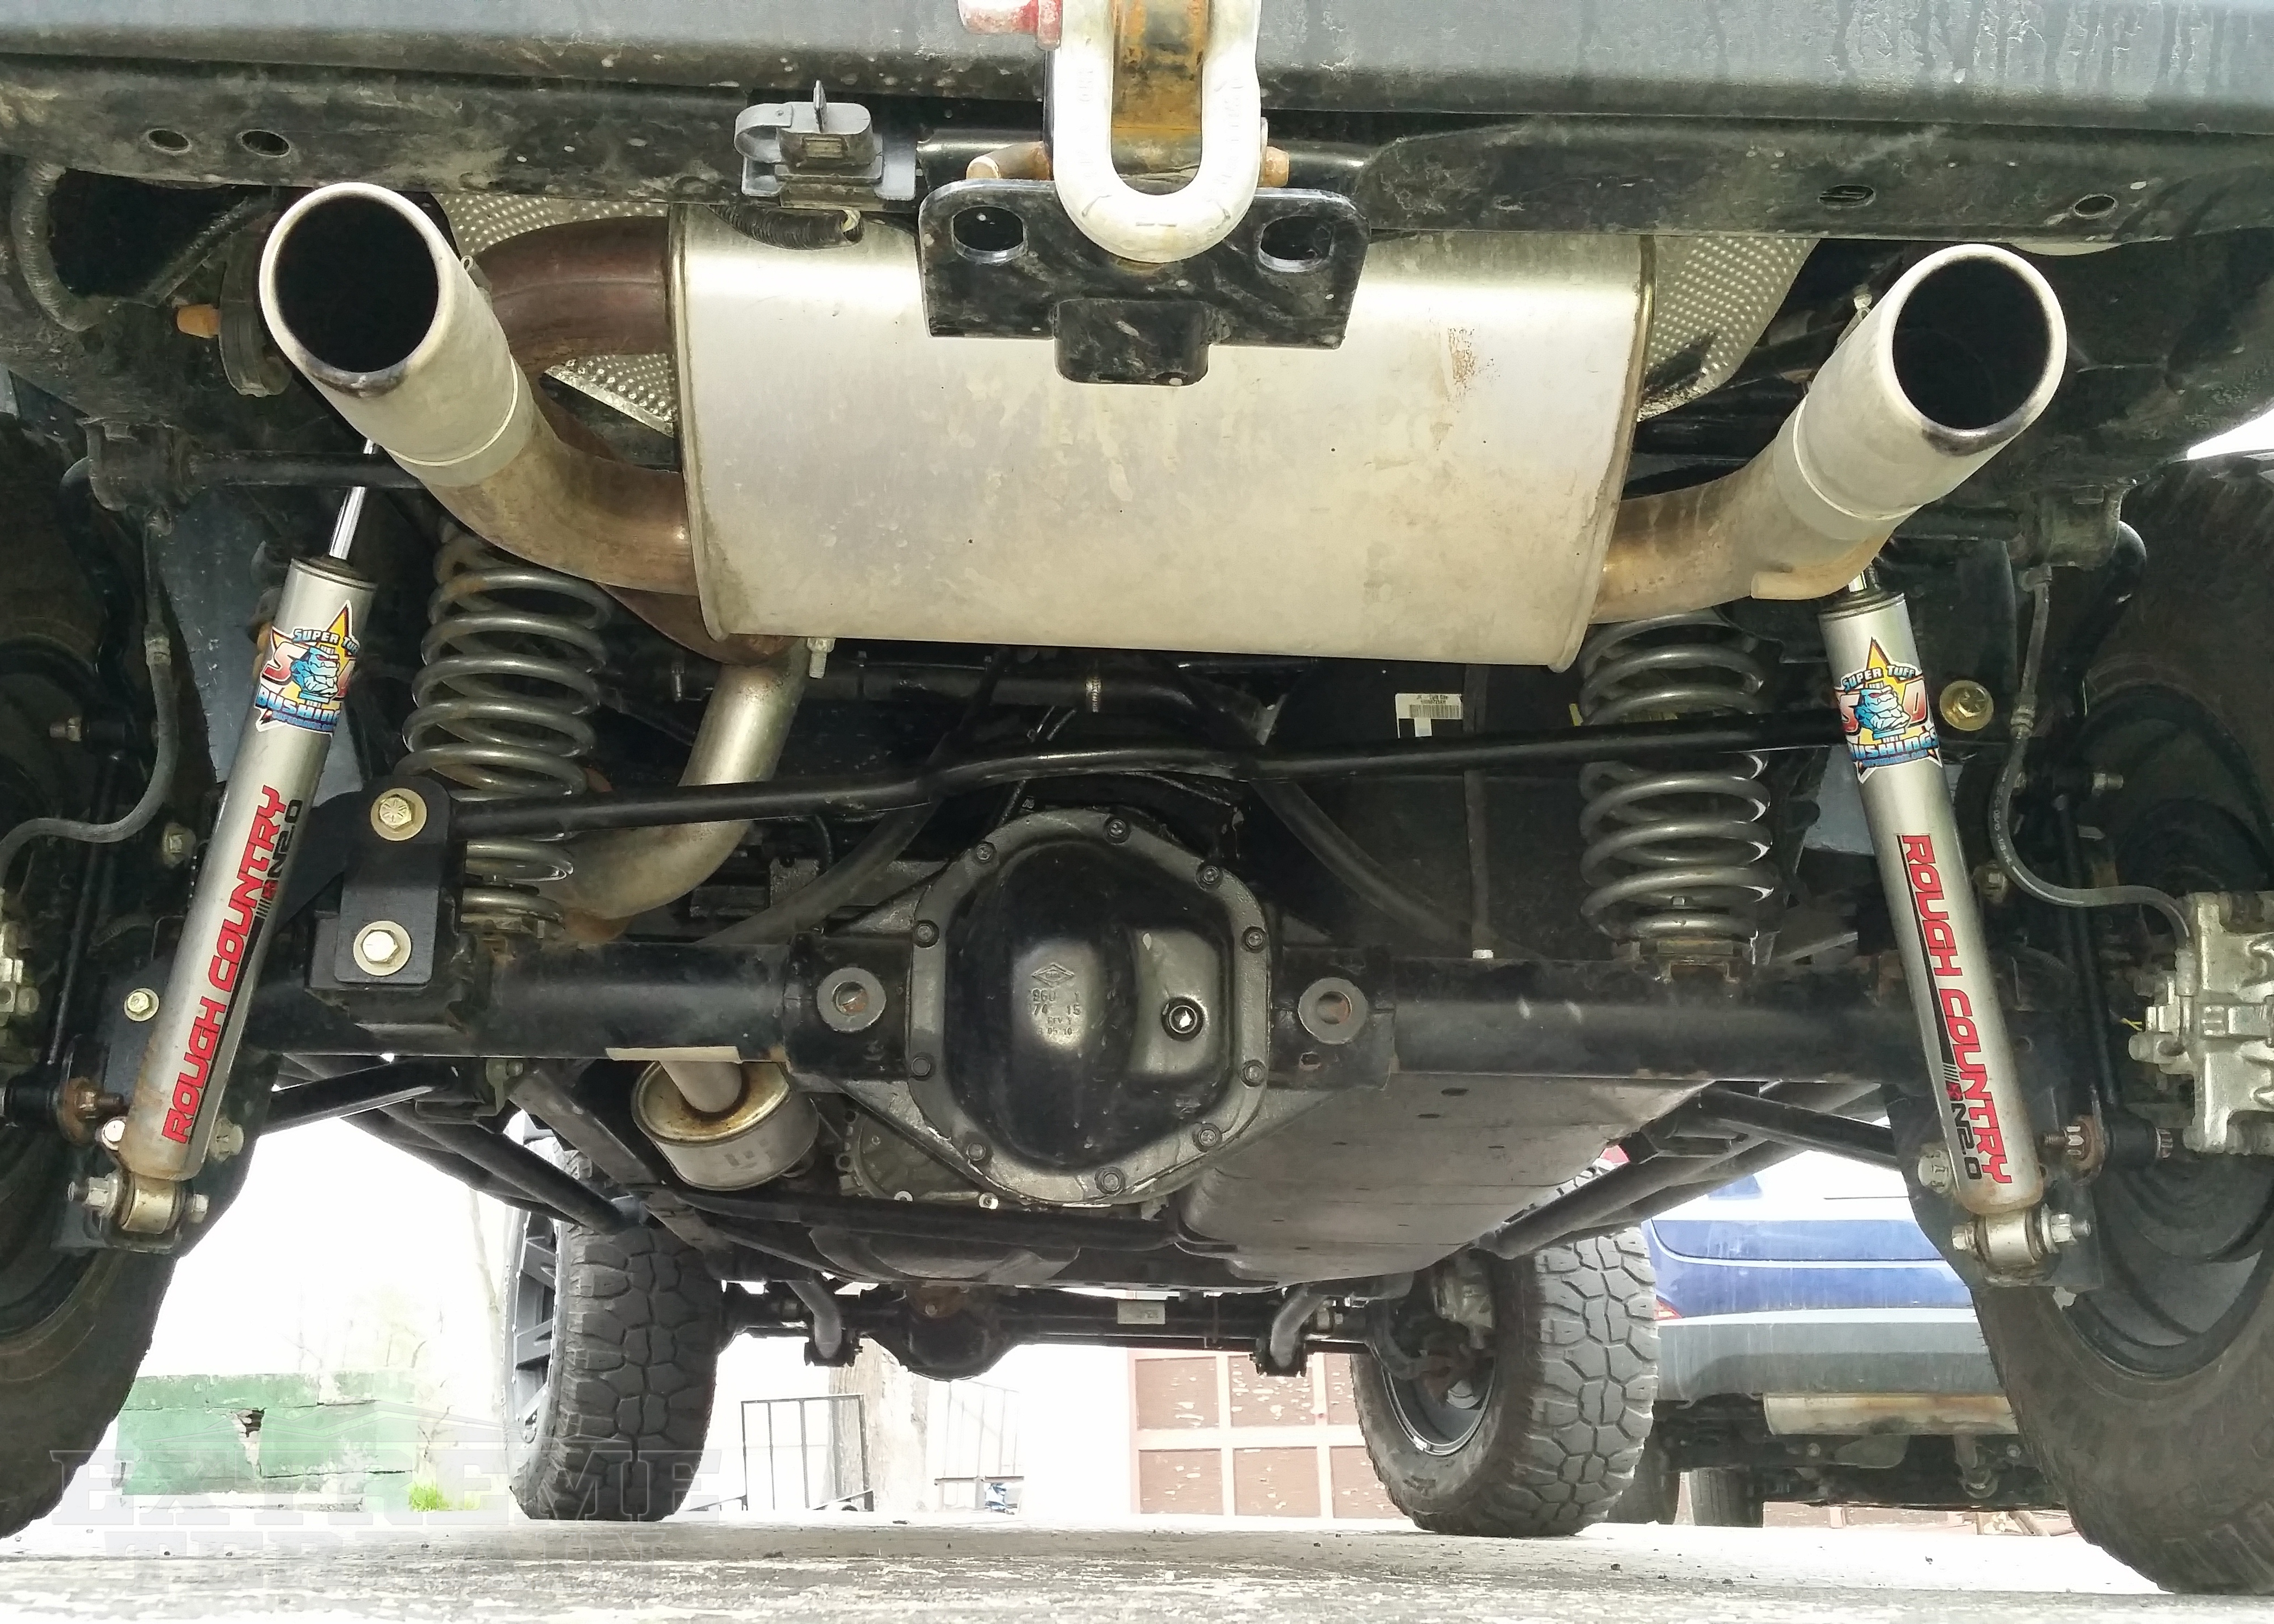 2015 Wrangler with Axleback Exhaust System